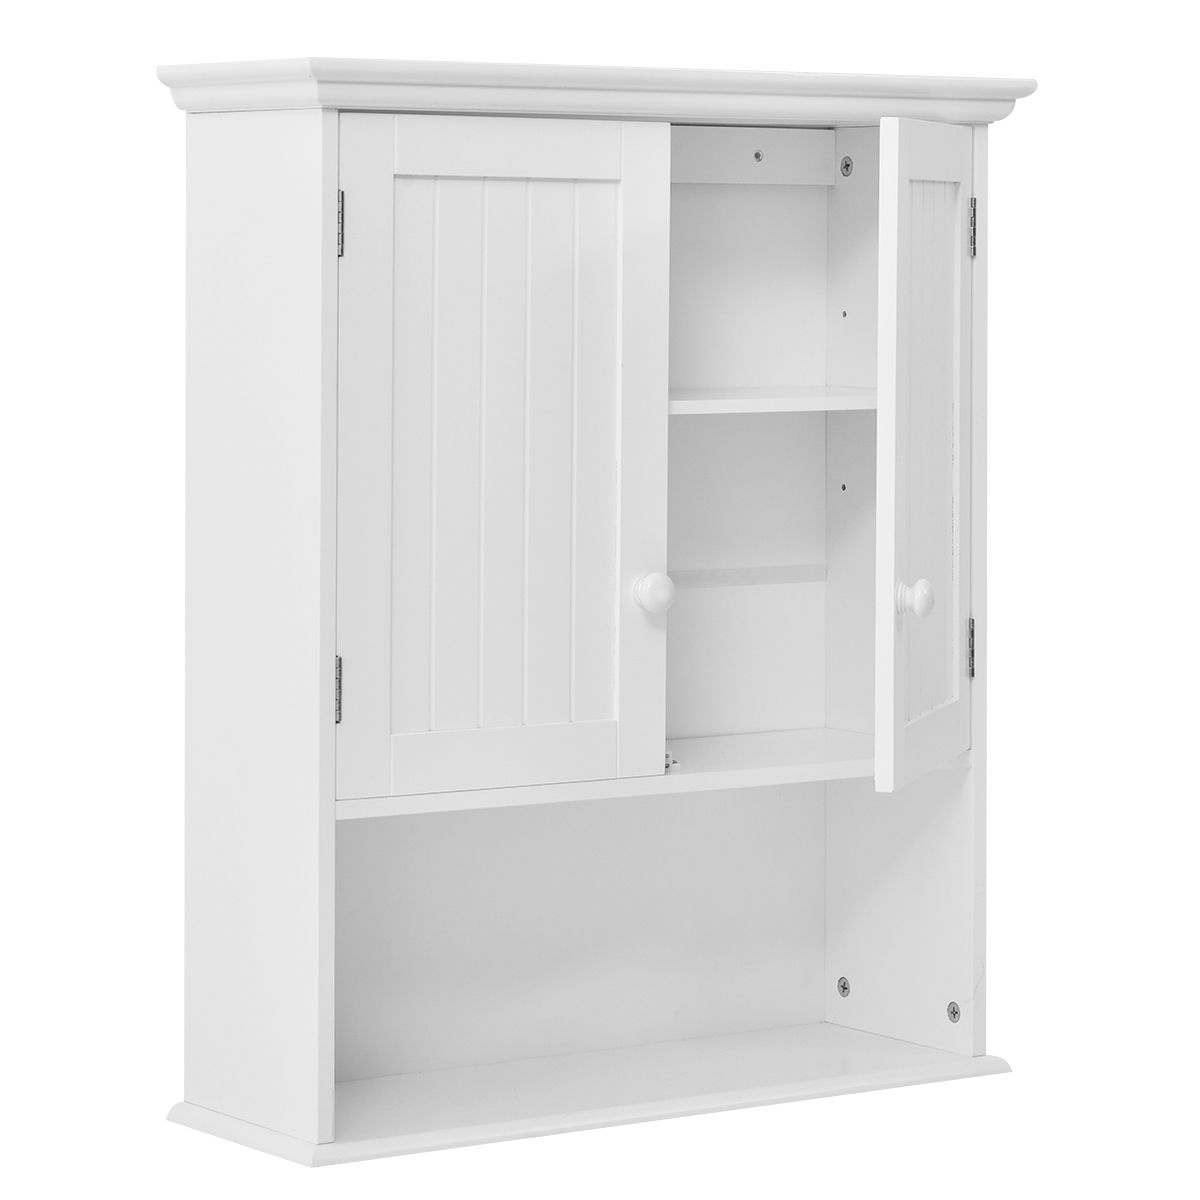 WELLFOR CY bathroom cabinet 23.5-in x 28-in x 8-in White Bathroom